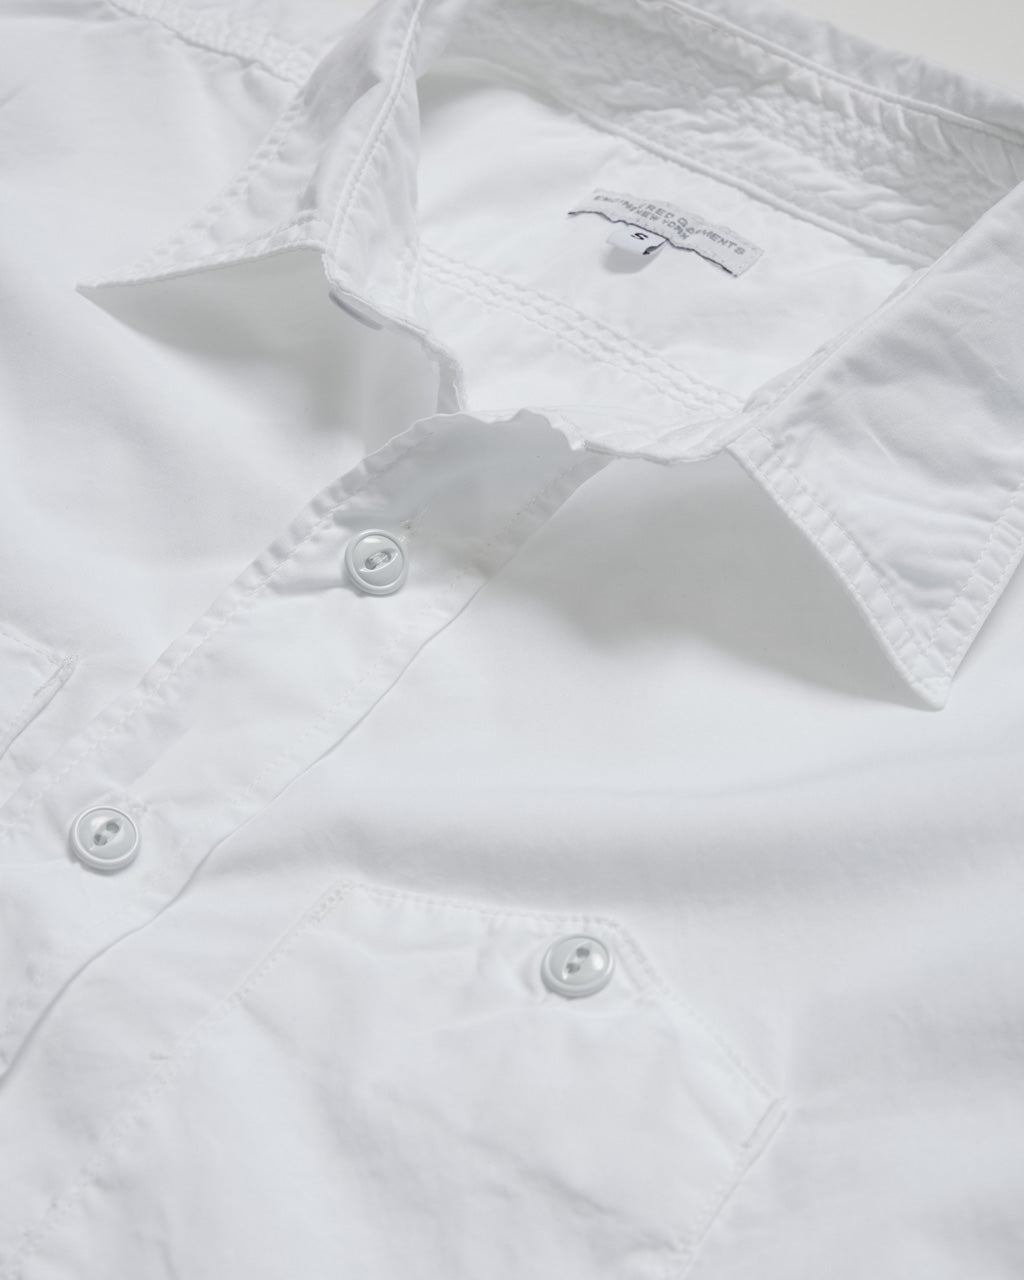 WORK SHIRT WHITE 100'S 2PLY BROADCLOTH